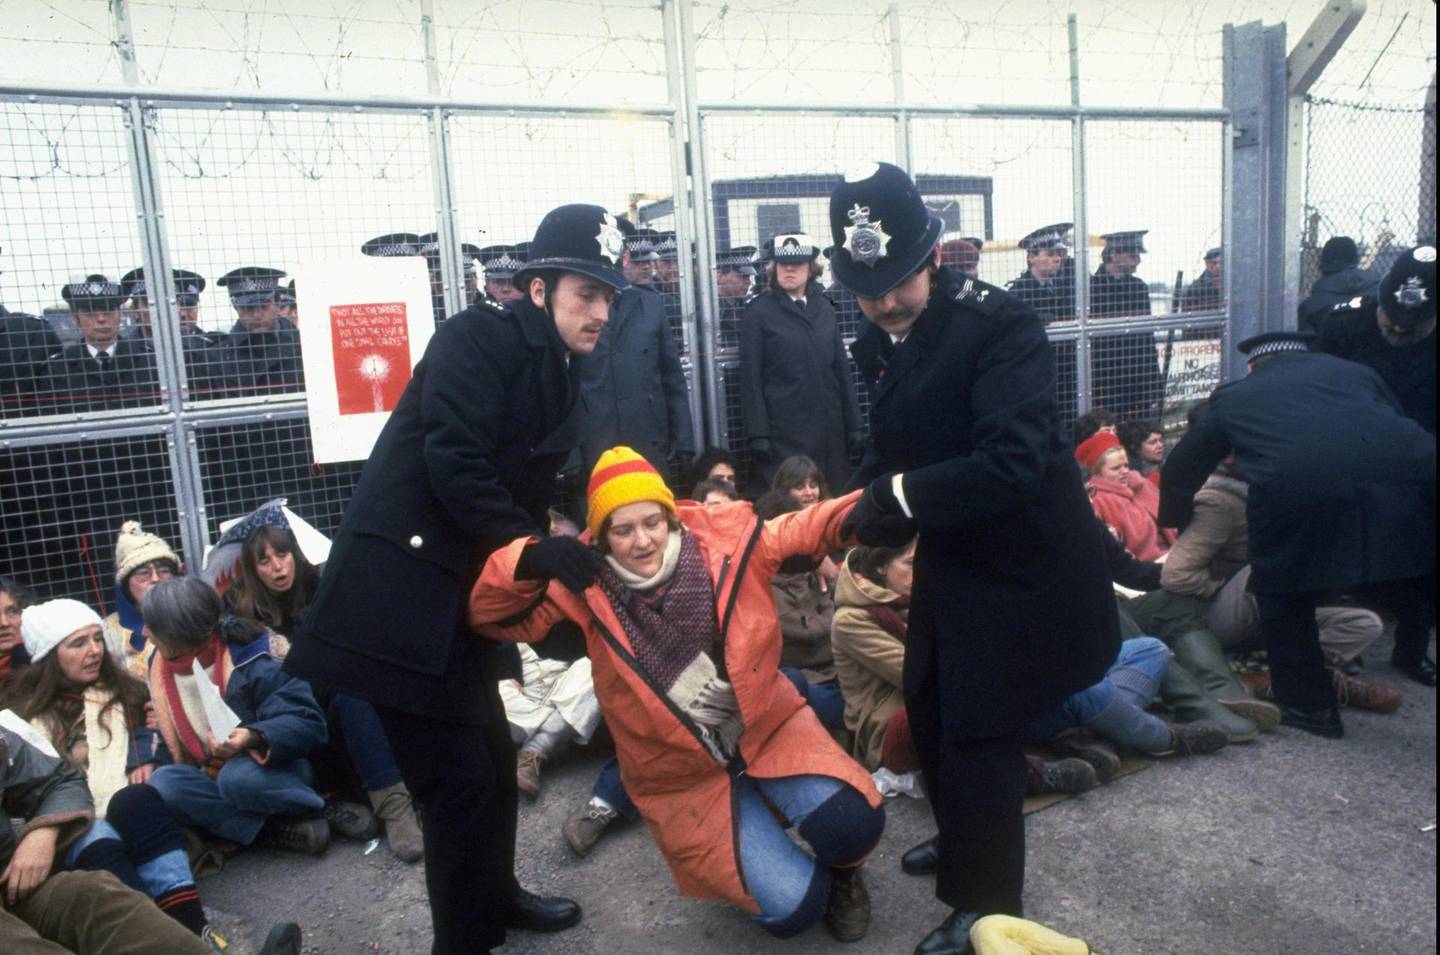 British police officers dragging protestor participating in anti-nuclear missle demonstration outside Greenham Common Air Base during arrival of US Tomahawk cruise missiles.  (Photo by Sahm Doherty/The LIFE Images Collection via Getty Images/Getty Images)